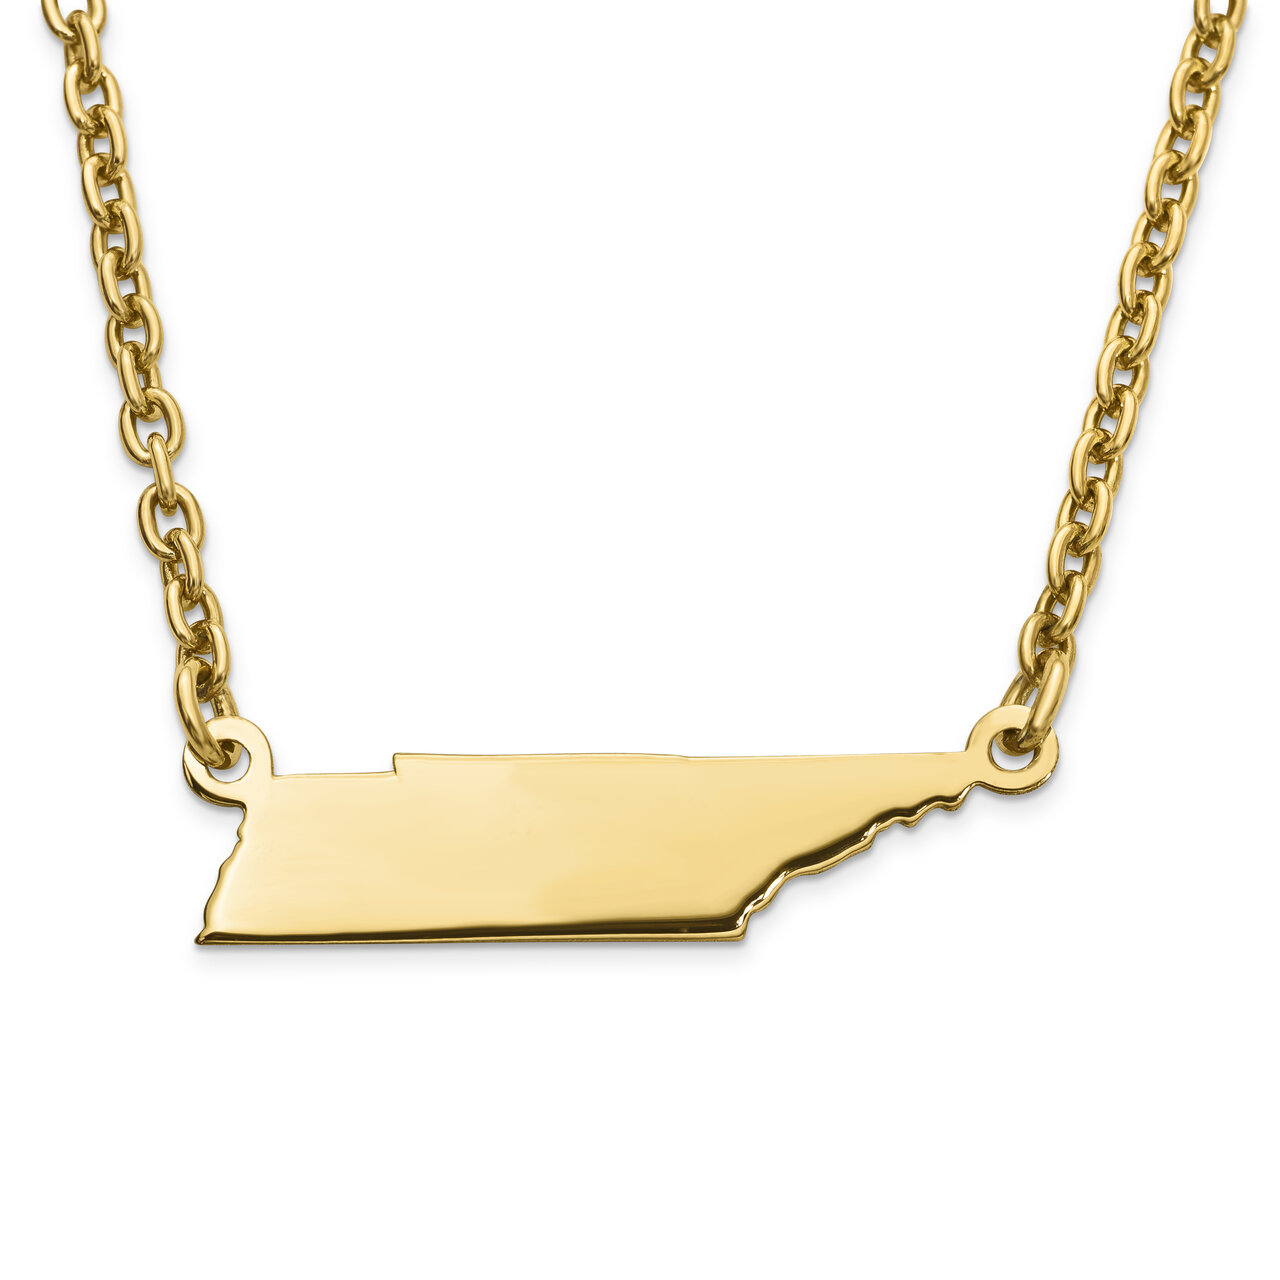 Tennessee State Pendant Necklace with Chain 14k Yellow Gold Engravable XNA706Y-TN